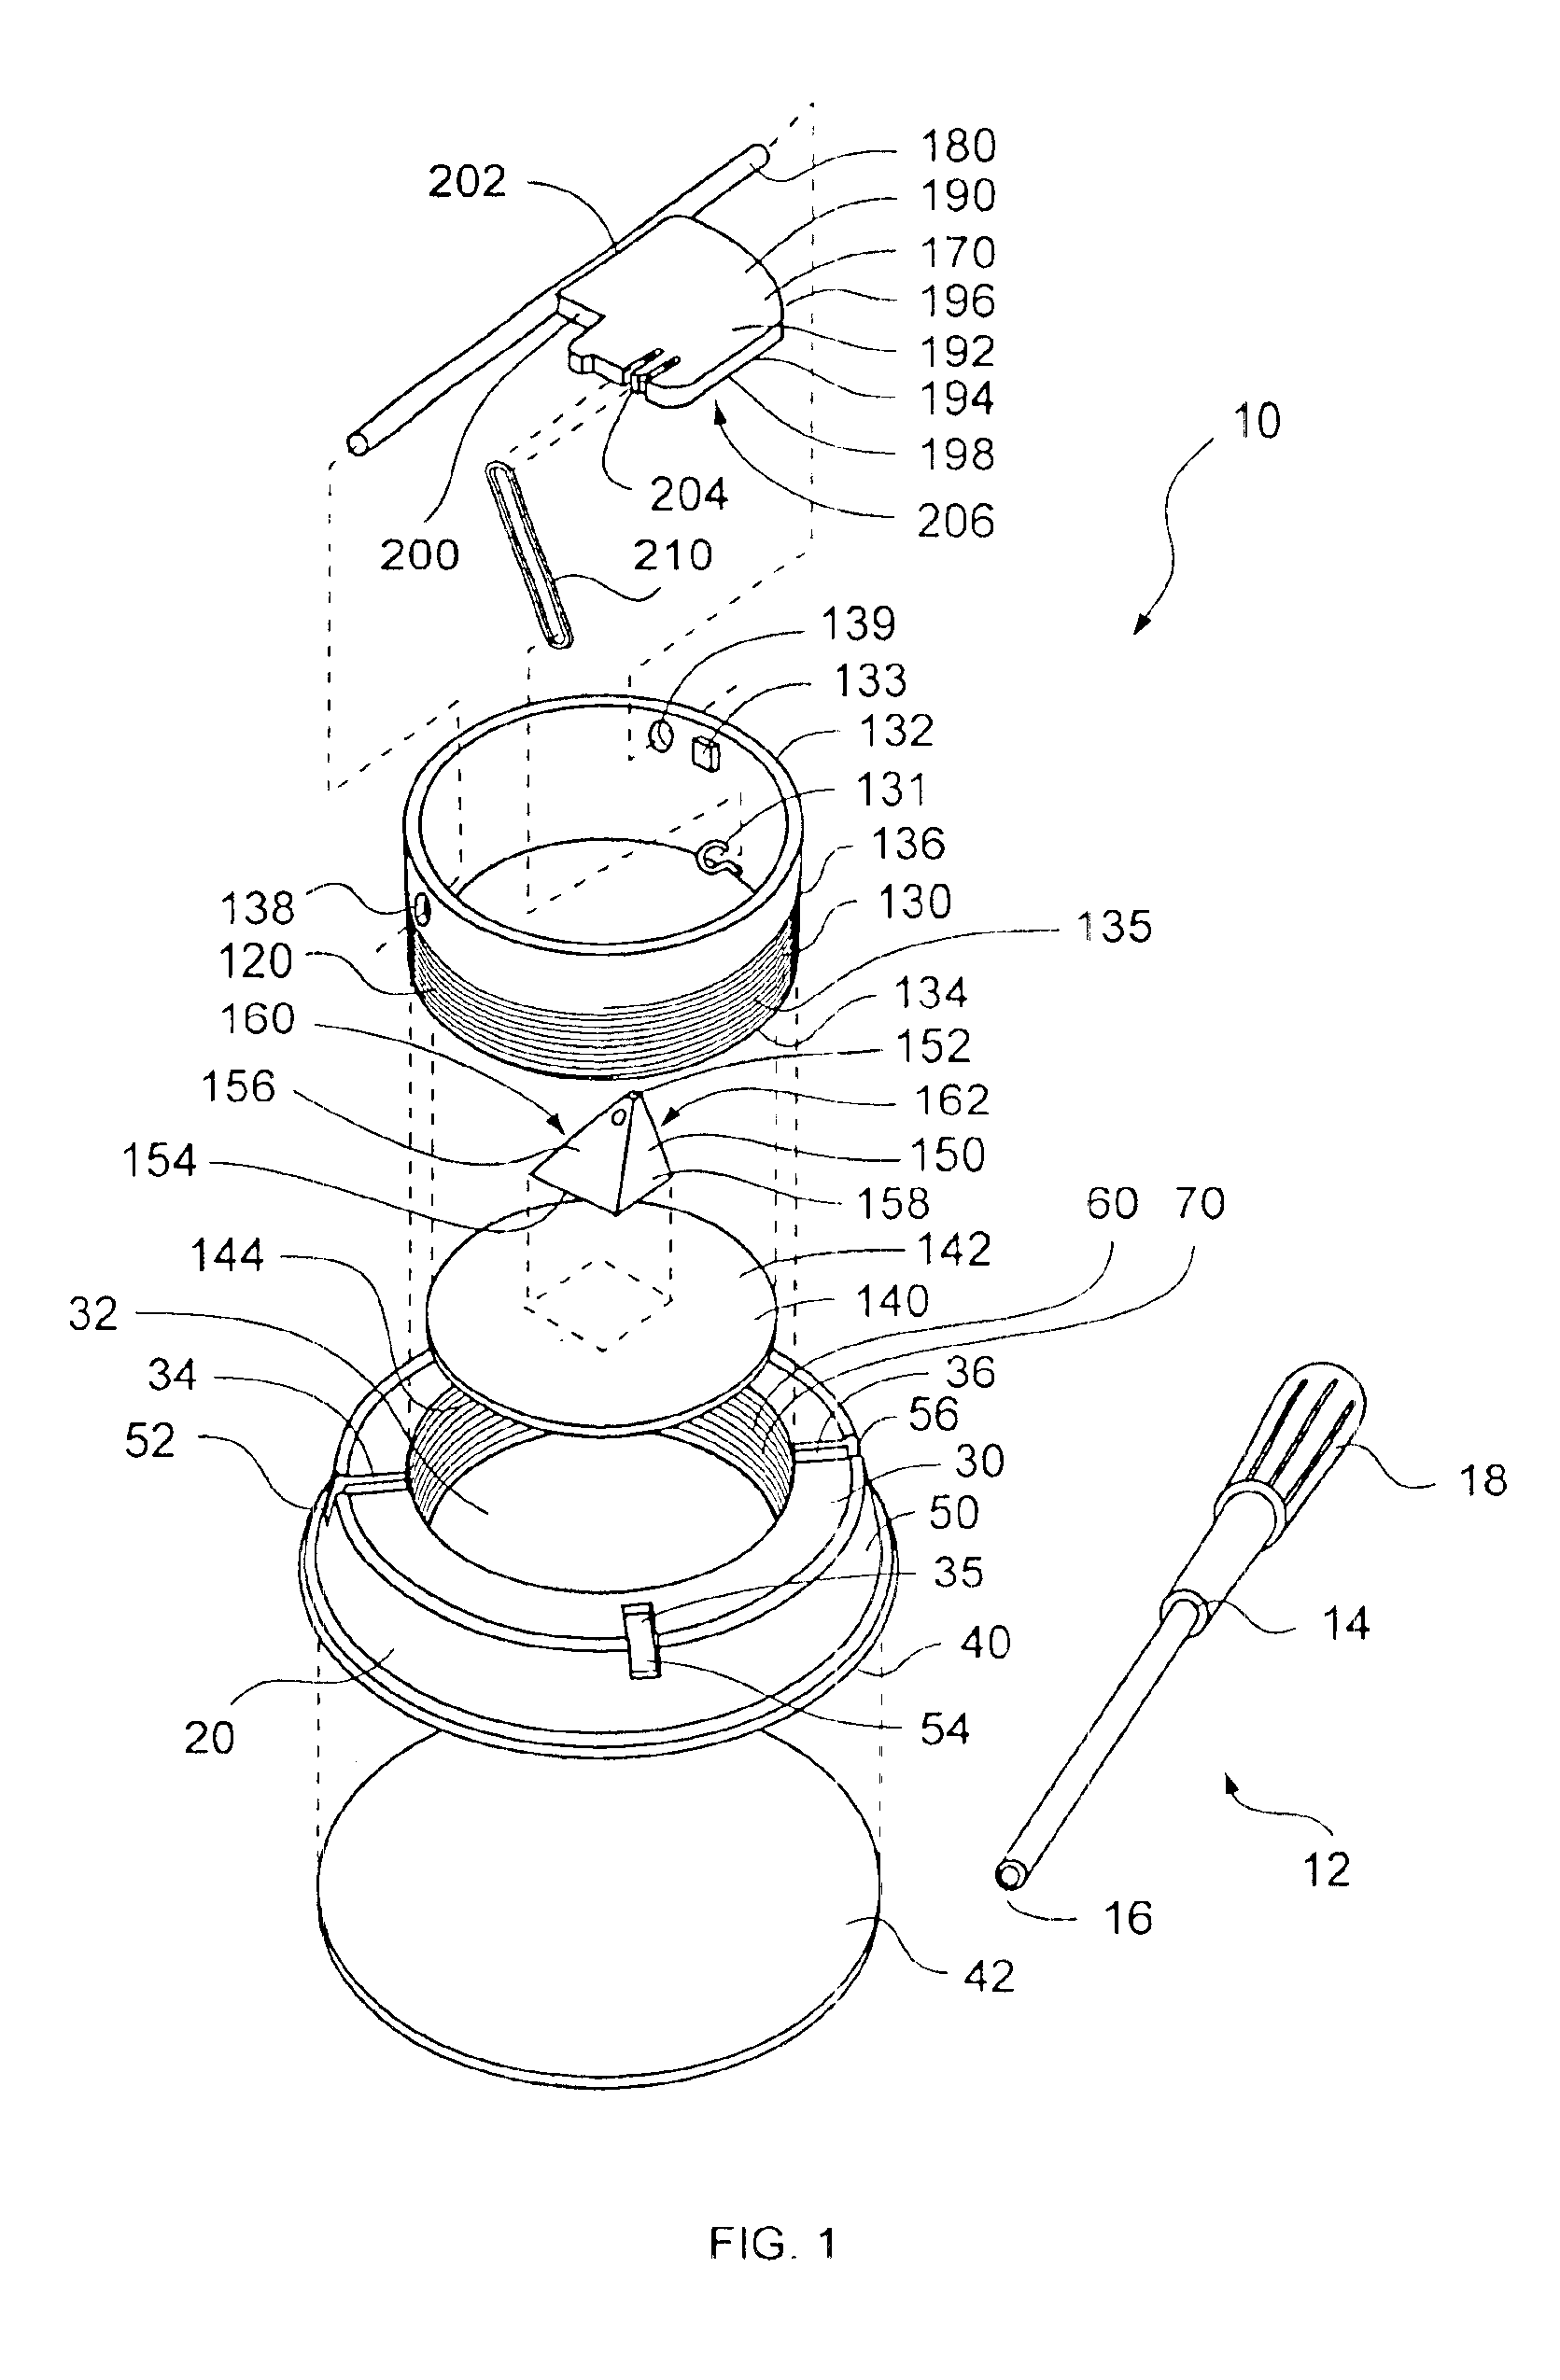 Game call device